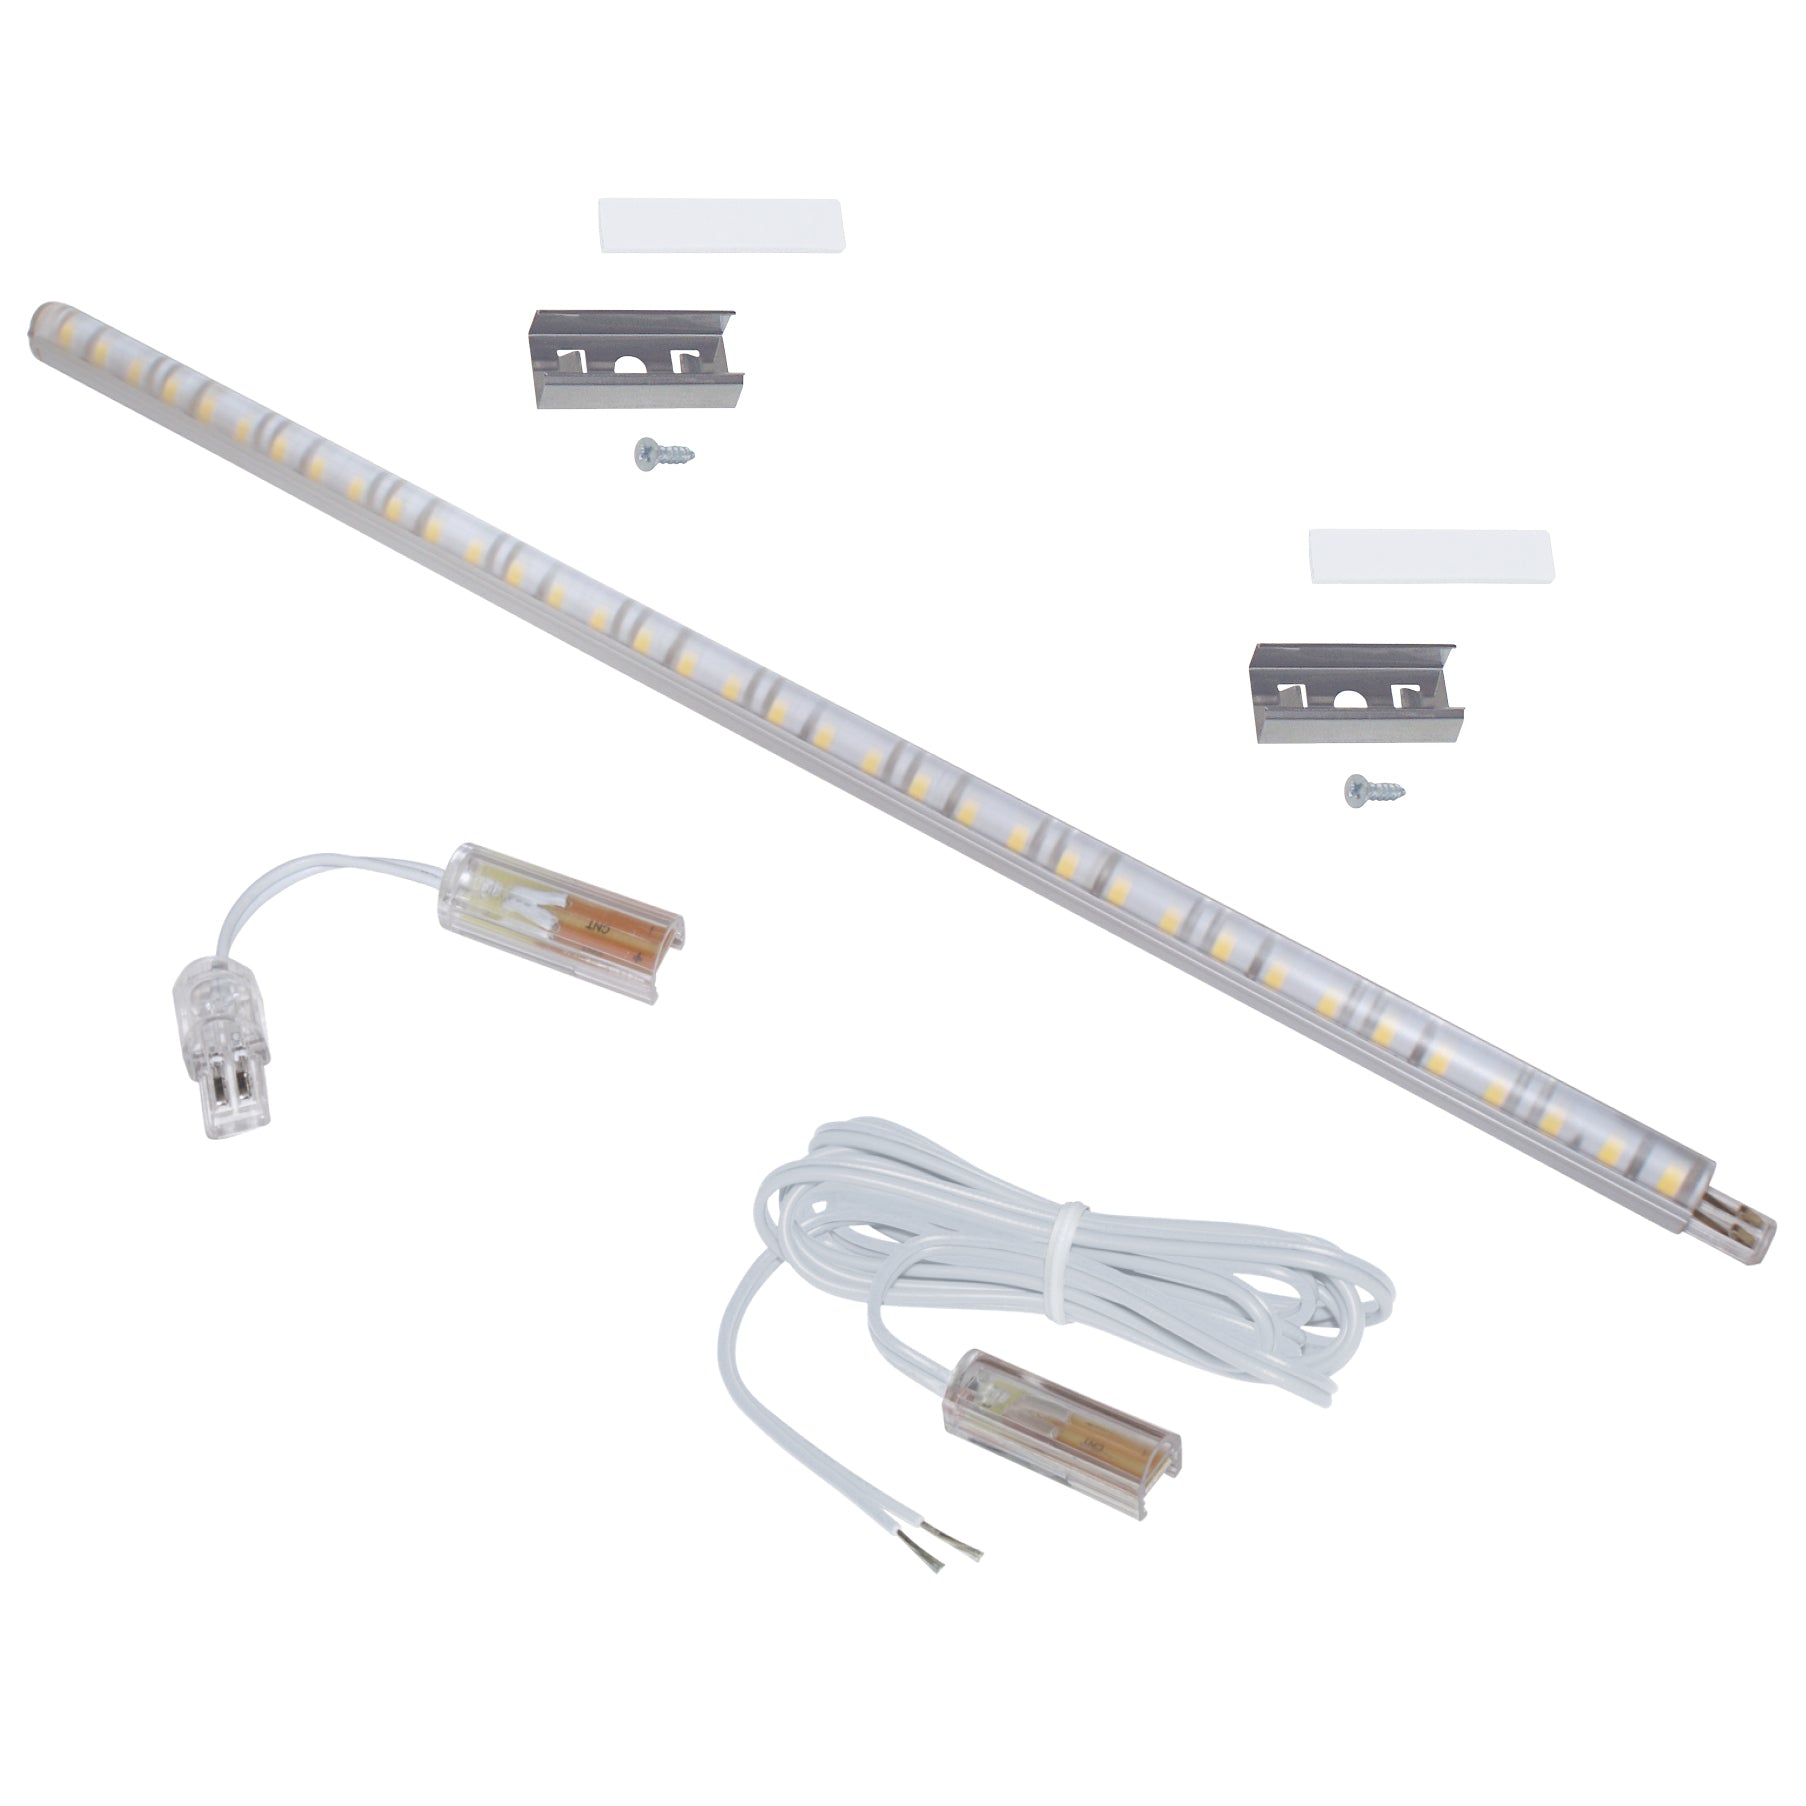 RigidStrip LED Tape – Armacost Lighting